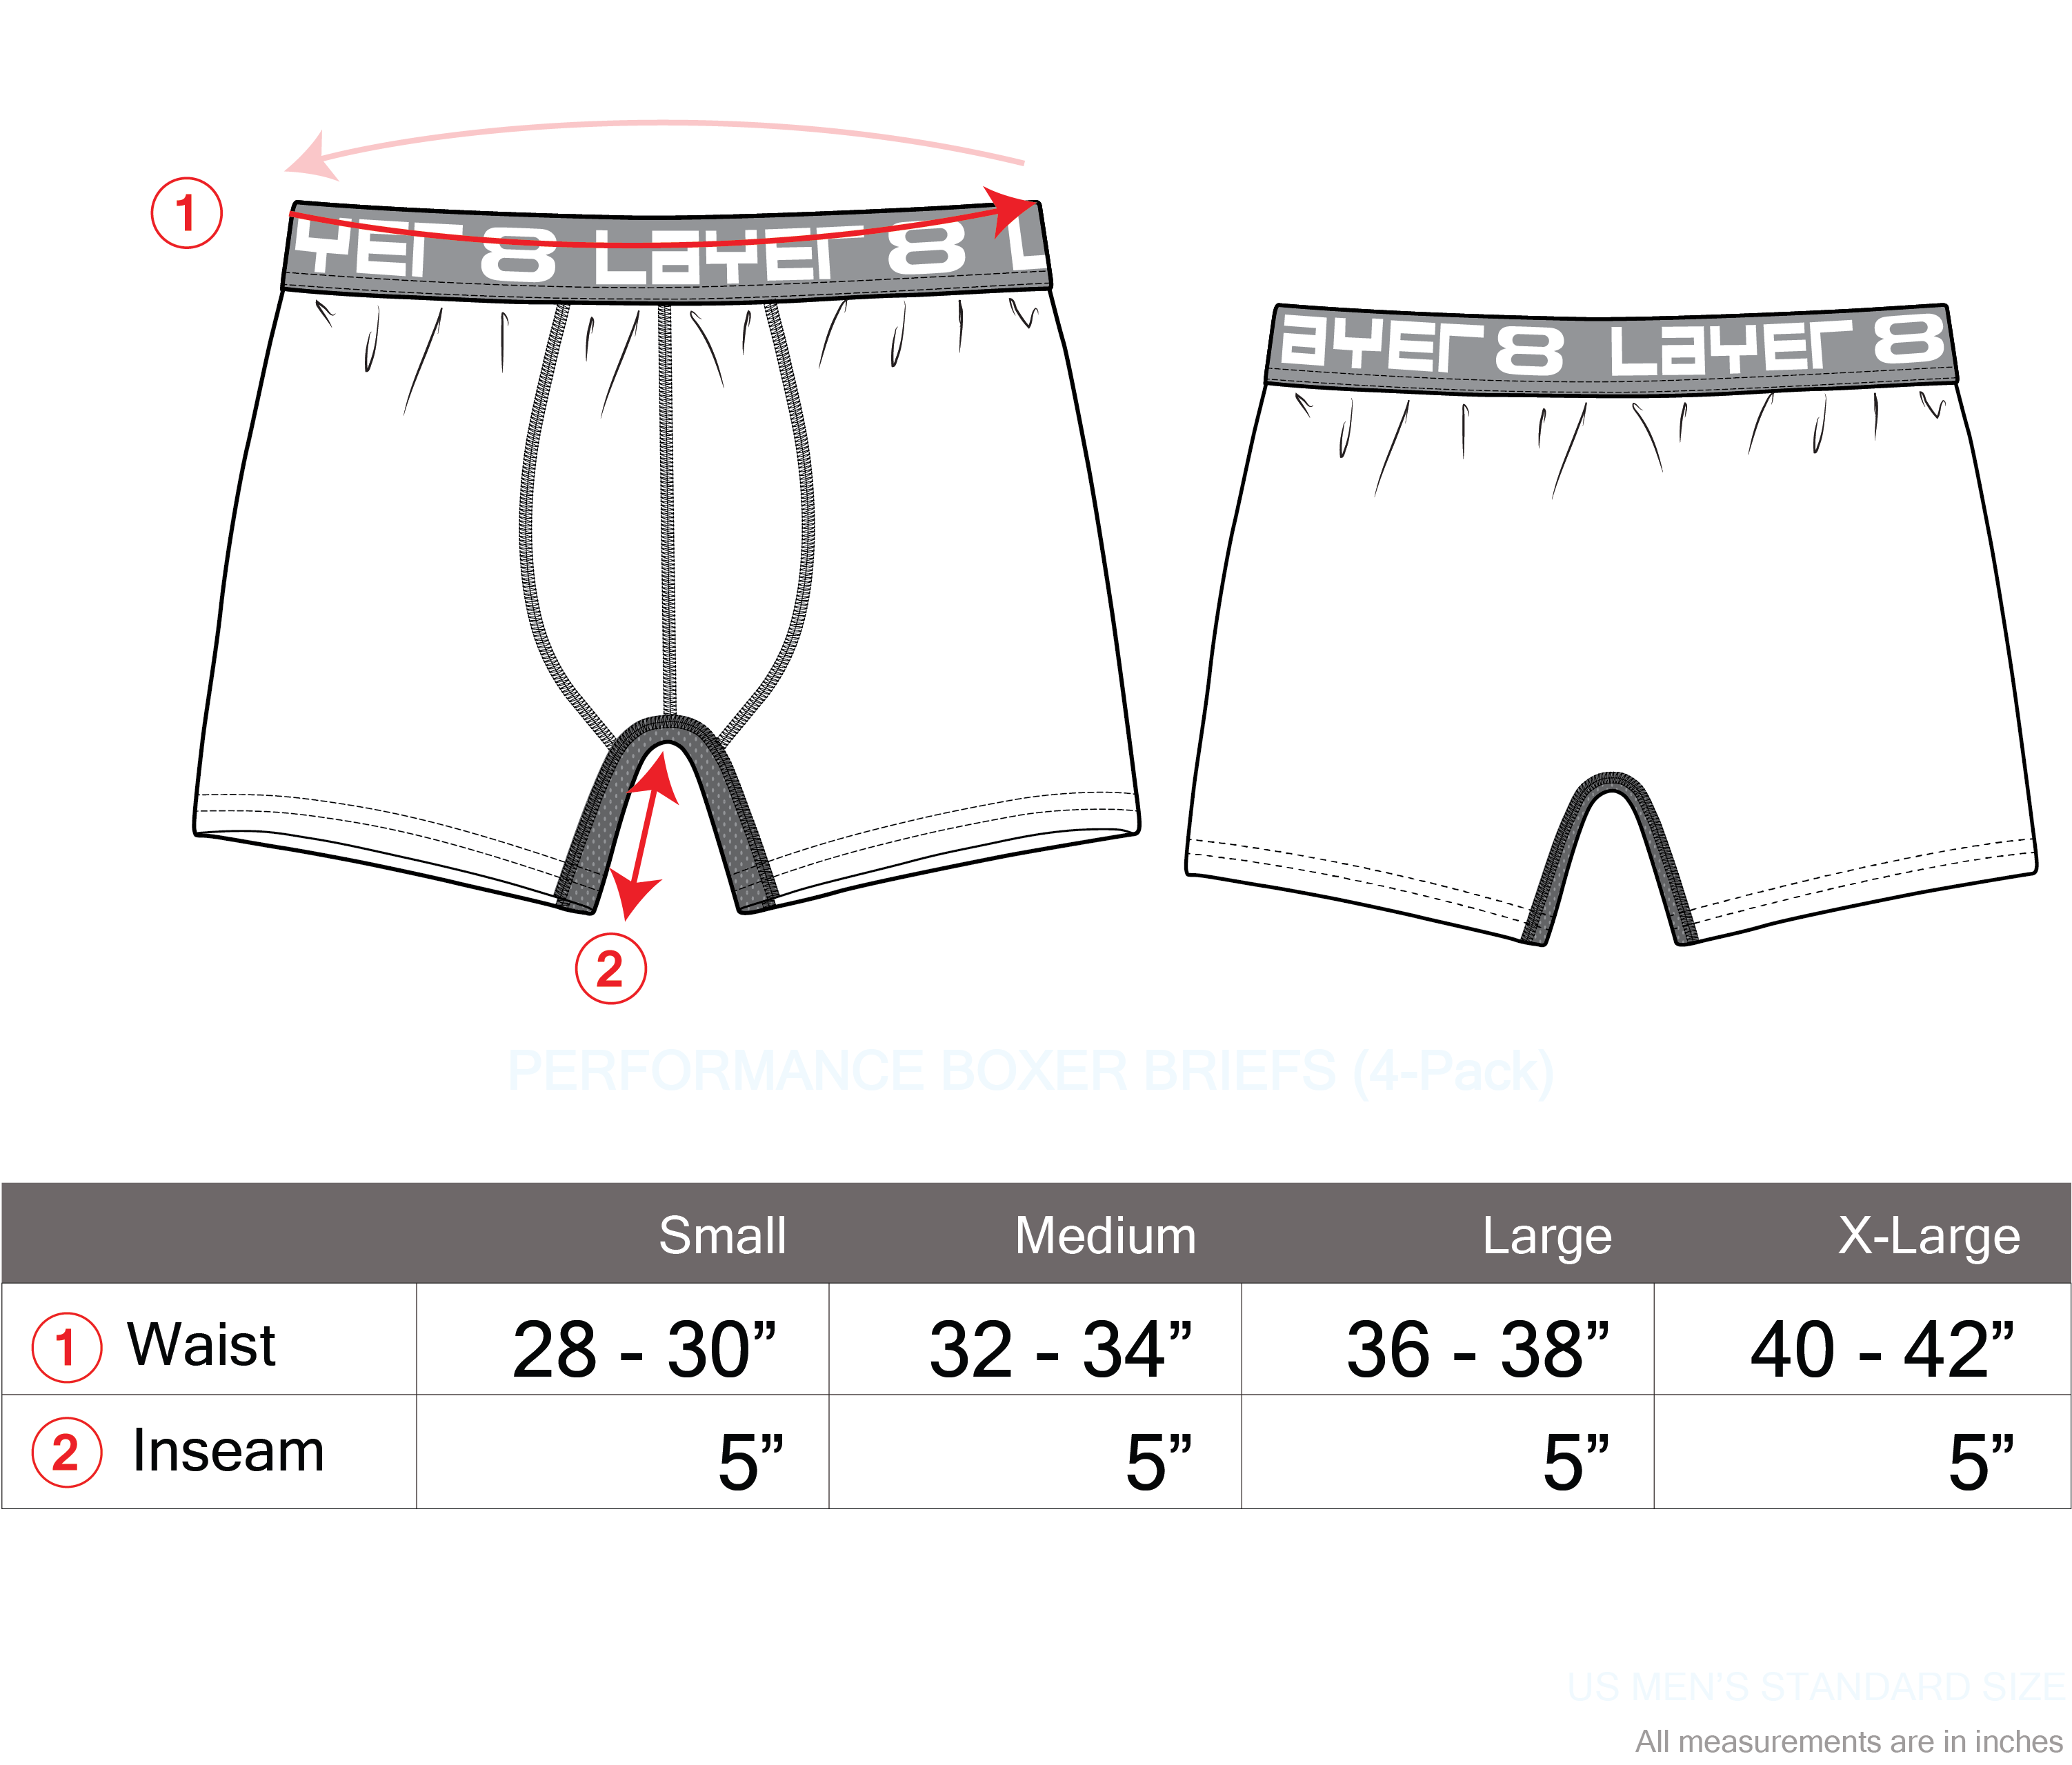 Performance Boxer Brief (4-Pack) – Layer 8